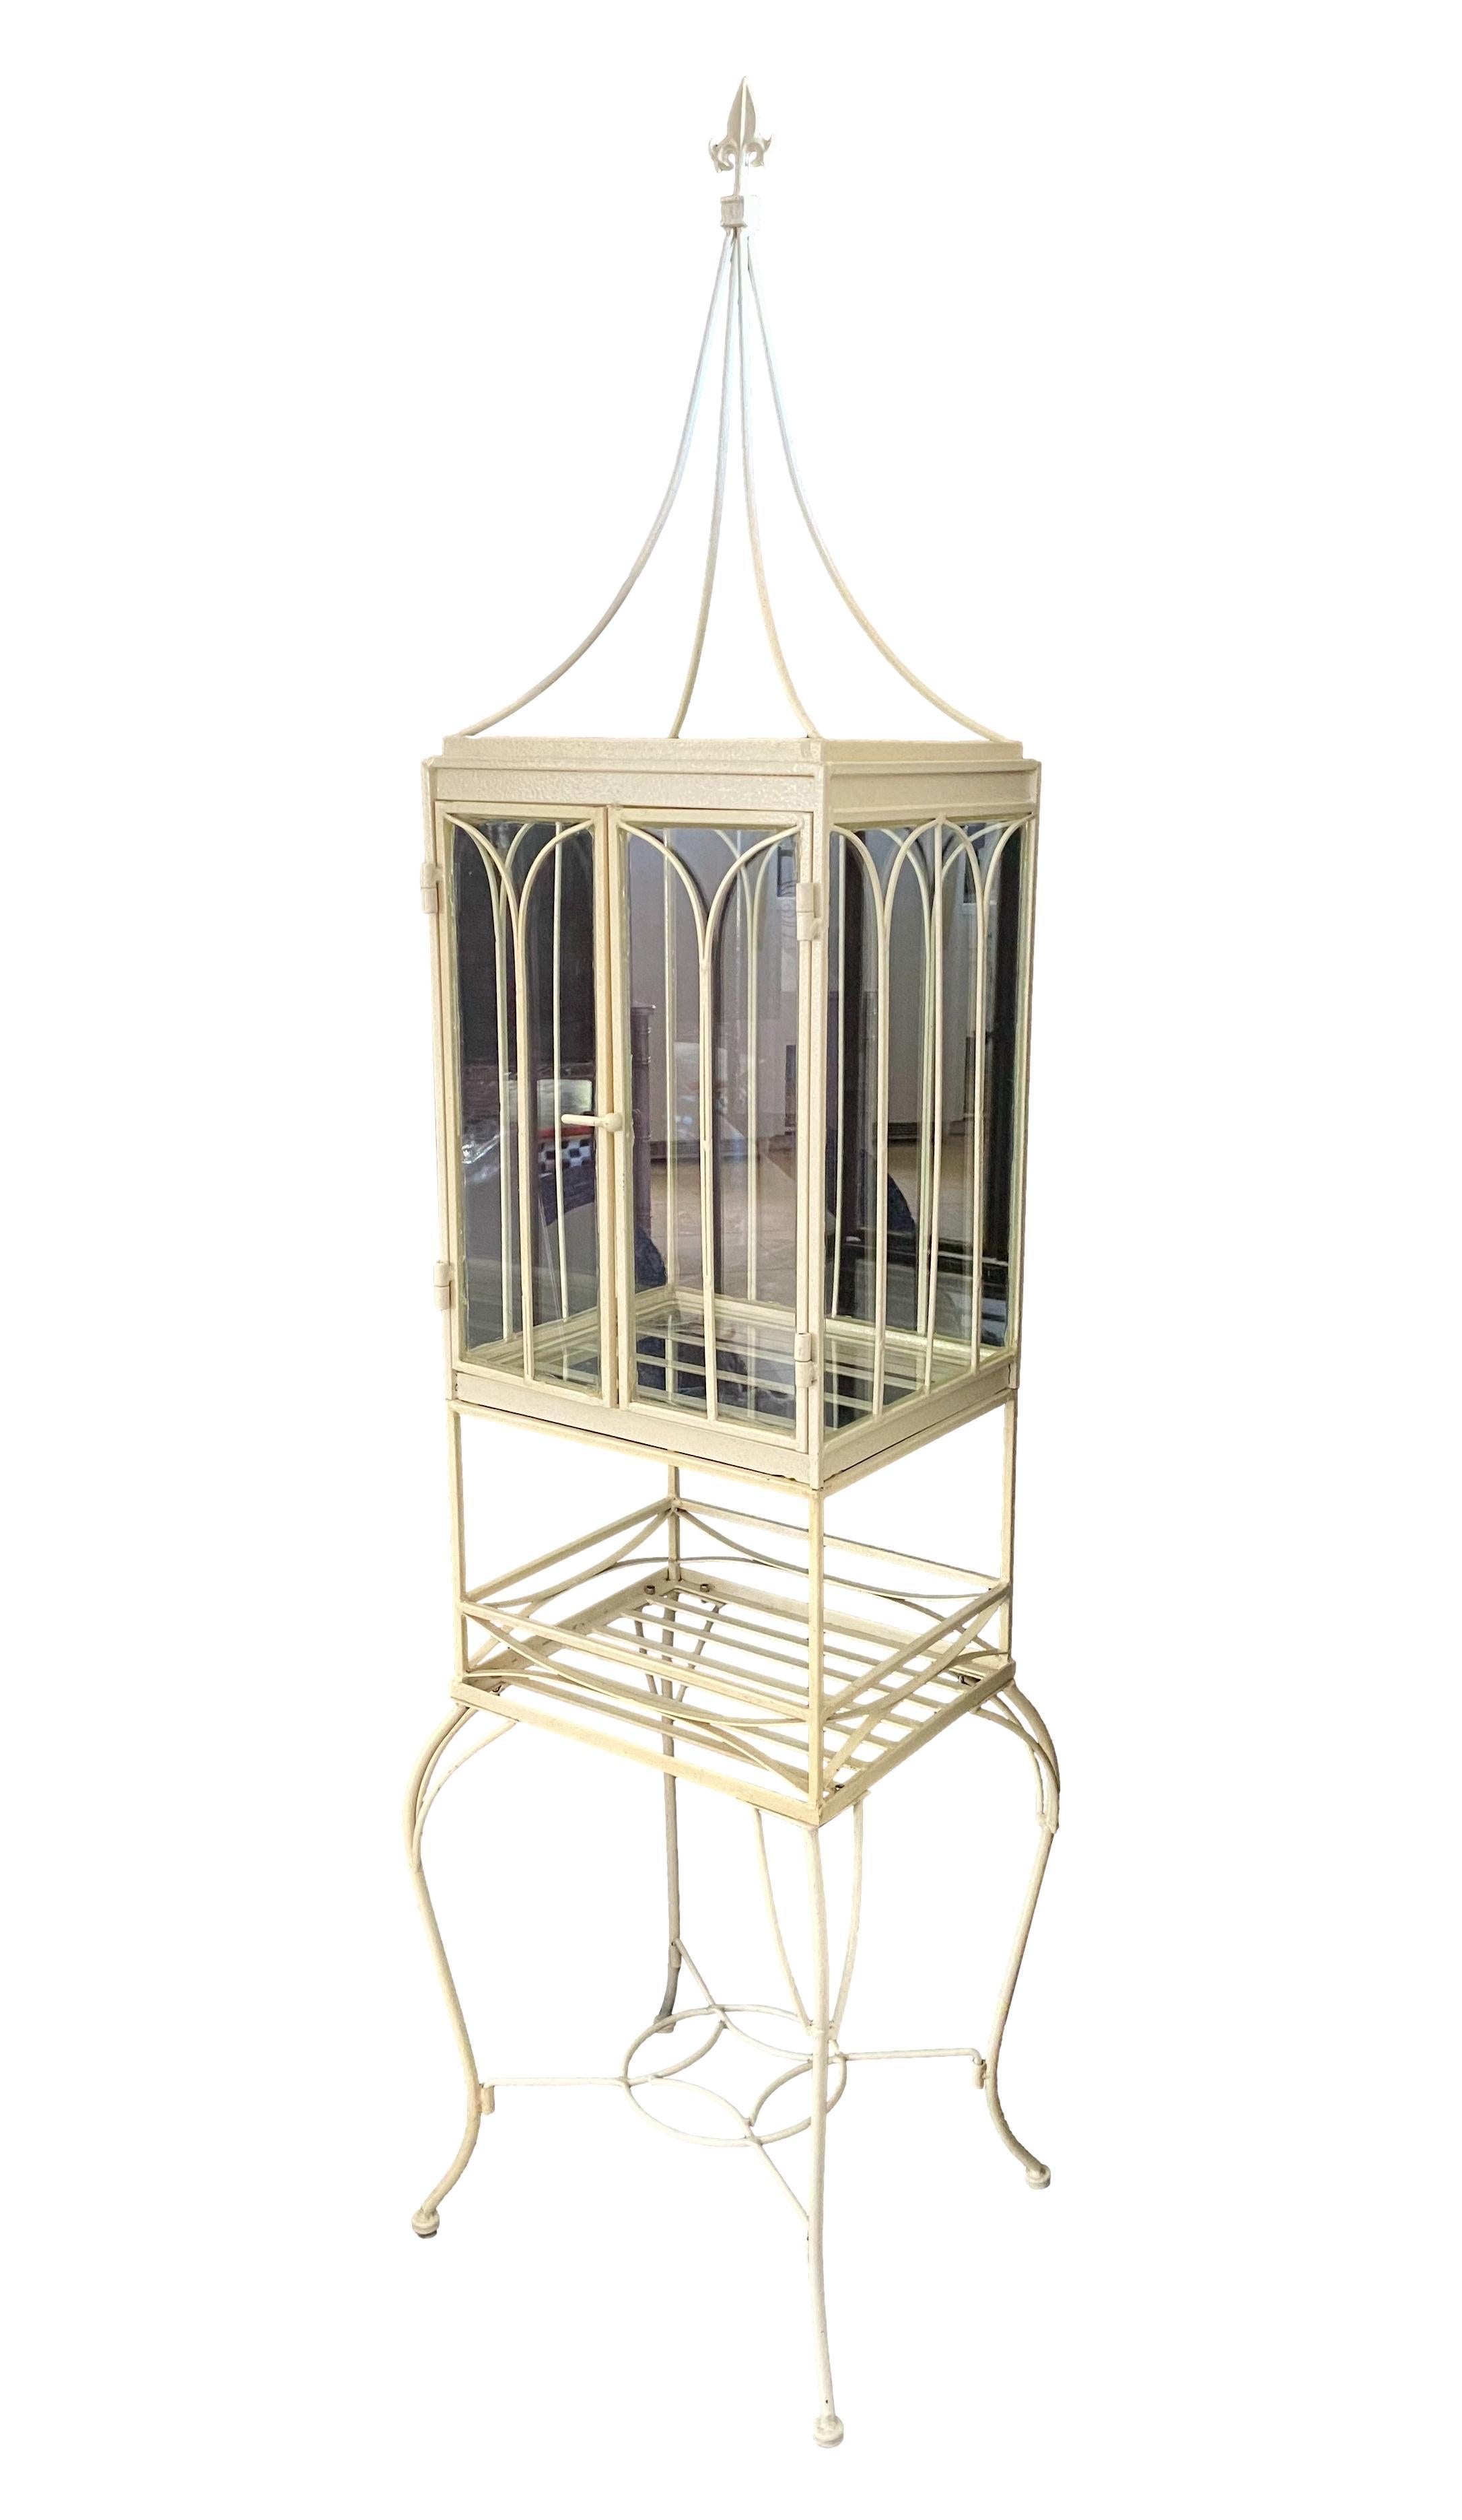 A vintage Victorian style Wardian case or terrarium on stand. Cream coated iron with glass panels.
Can be partially disassembled.

Dimensions: 19